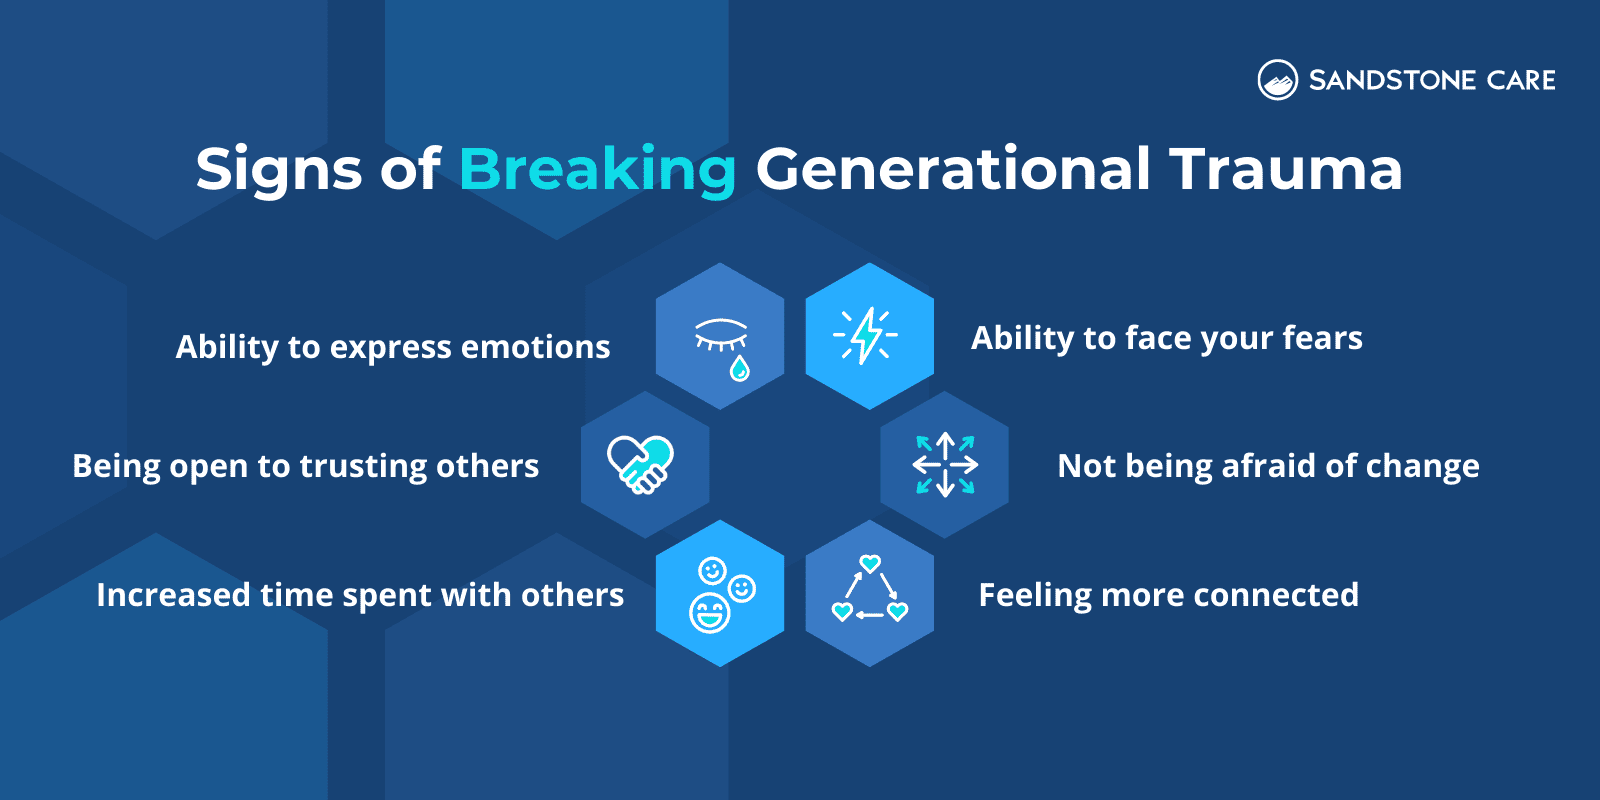 Signs of breaking generational trauma infographic